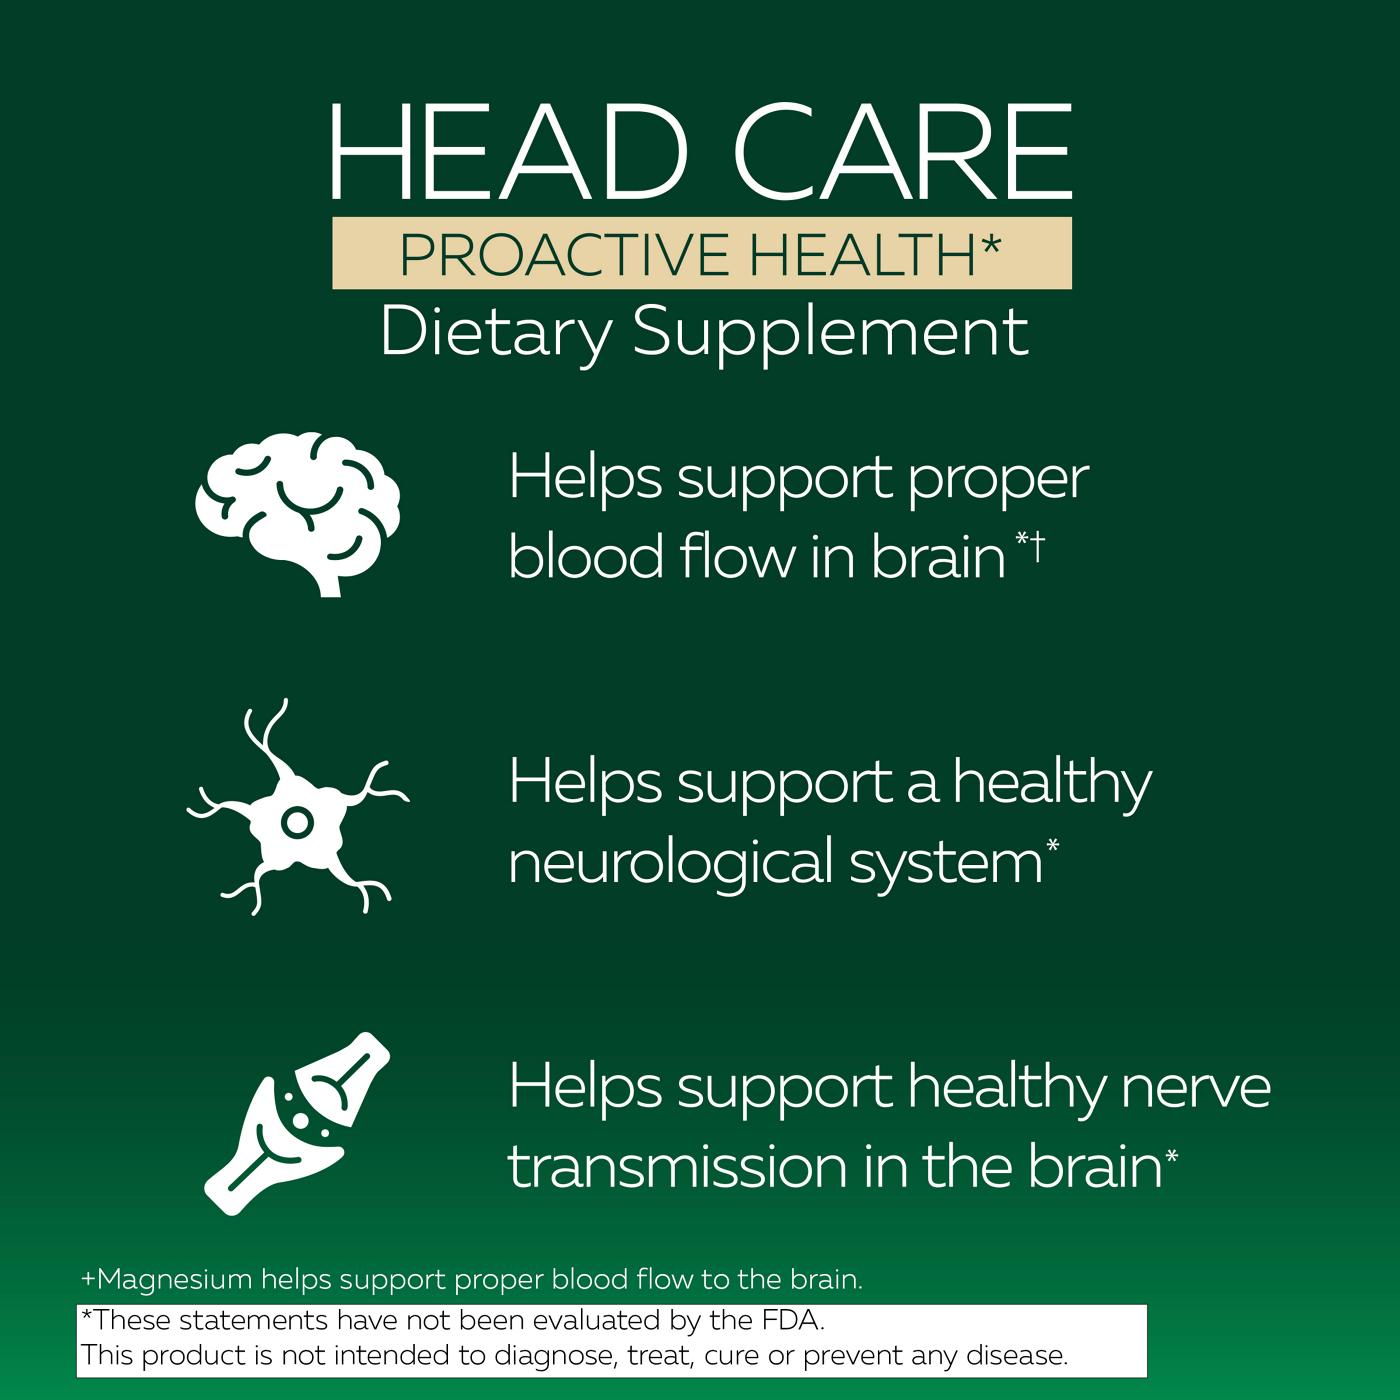 Excedrin Head Care Proactive Health Tablets - Shop Vitamins A-Z at